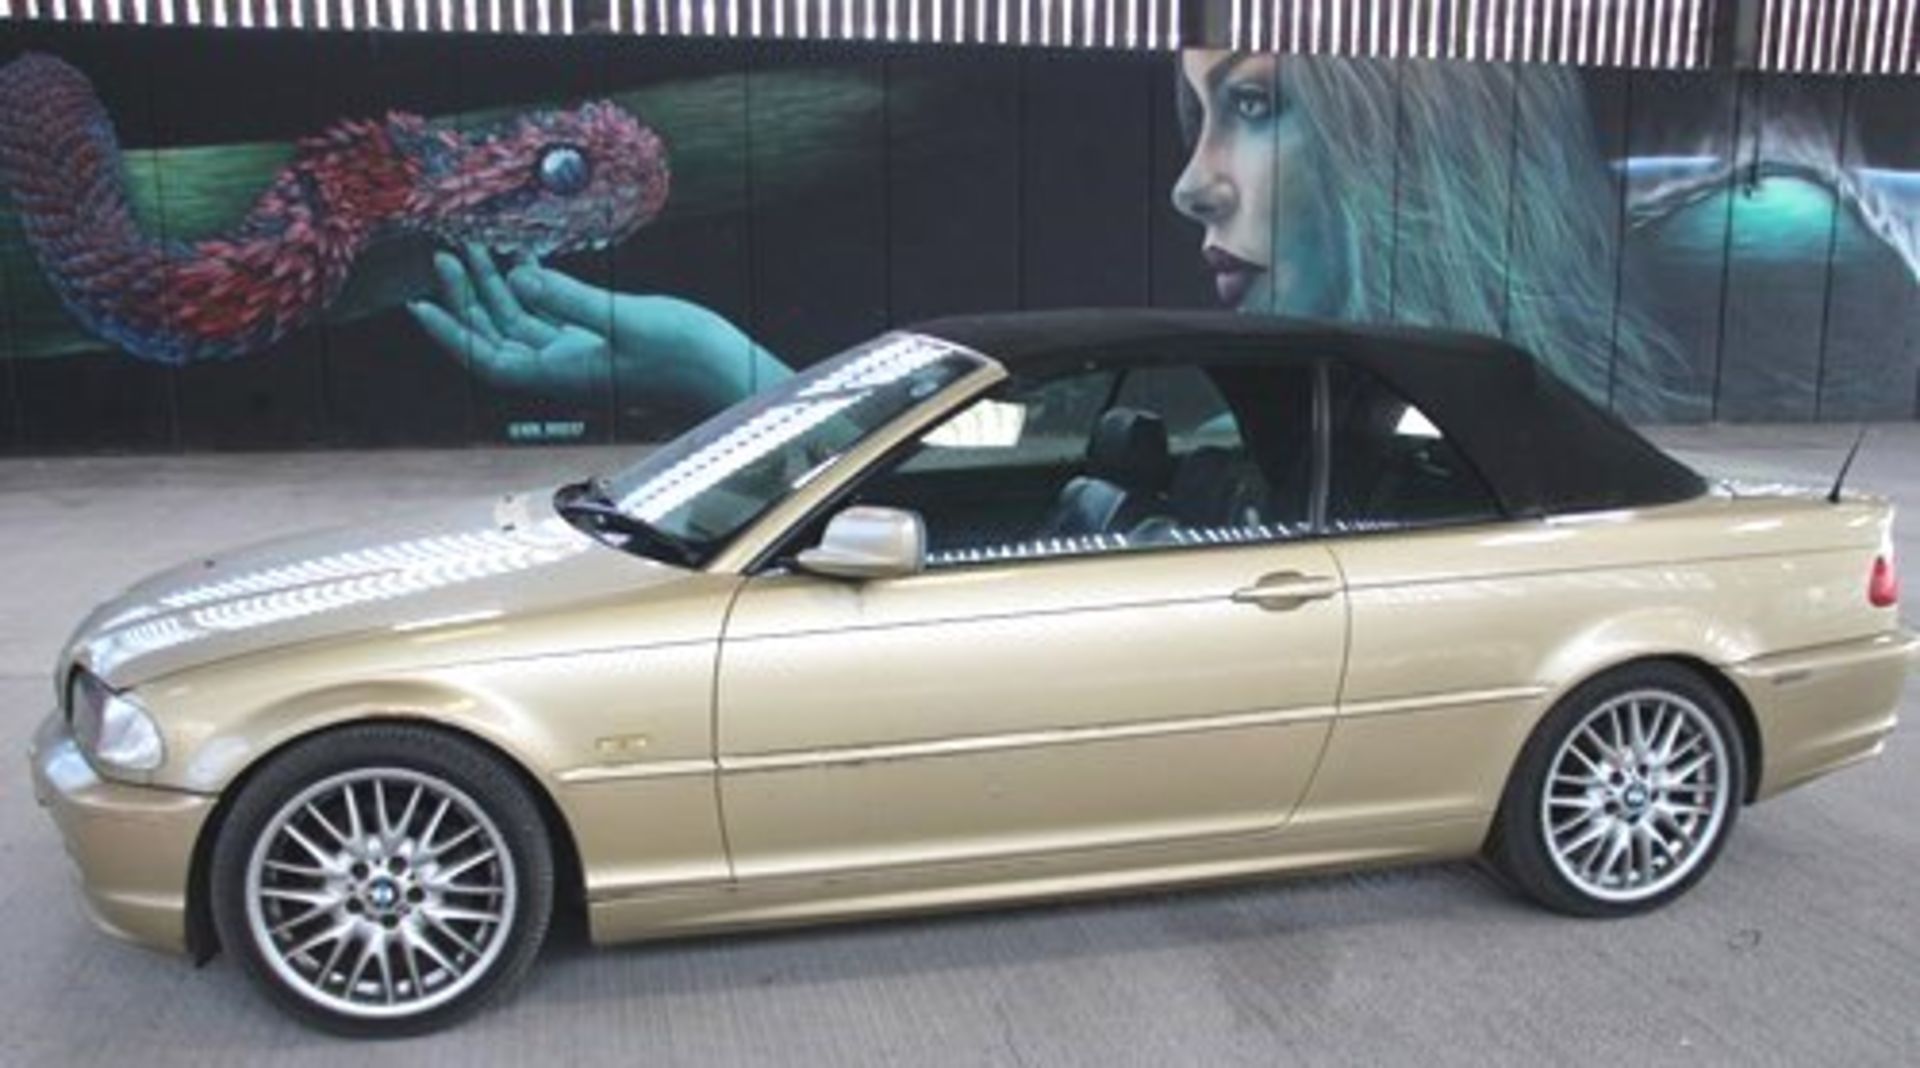 BMW 325CI petrol convertible car, Registration No. CV51 BNY, mileage 104743, 5 speed manual gearbox, - Image 2 of 10